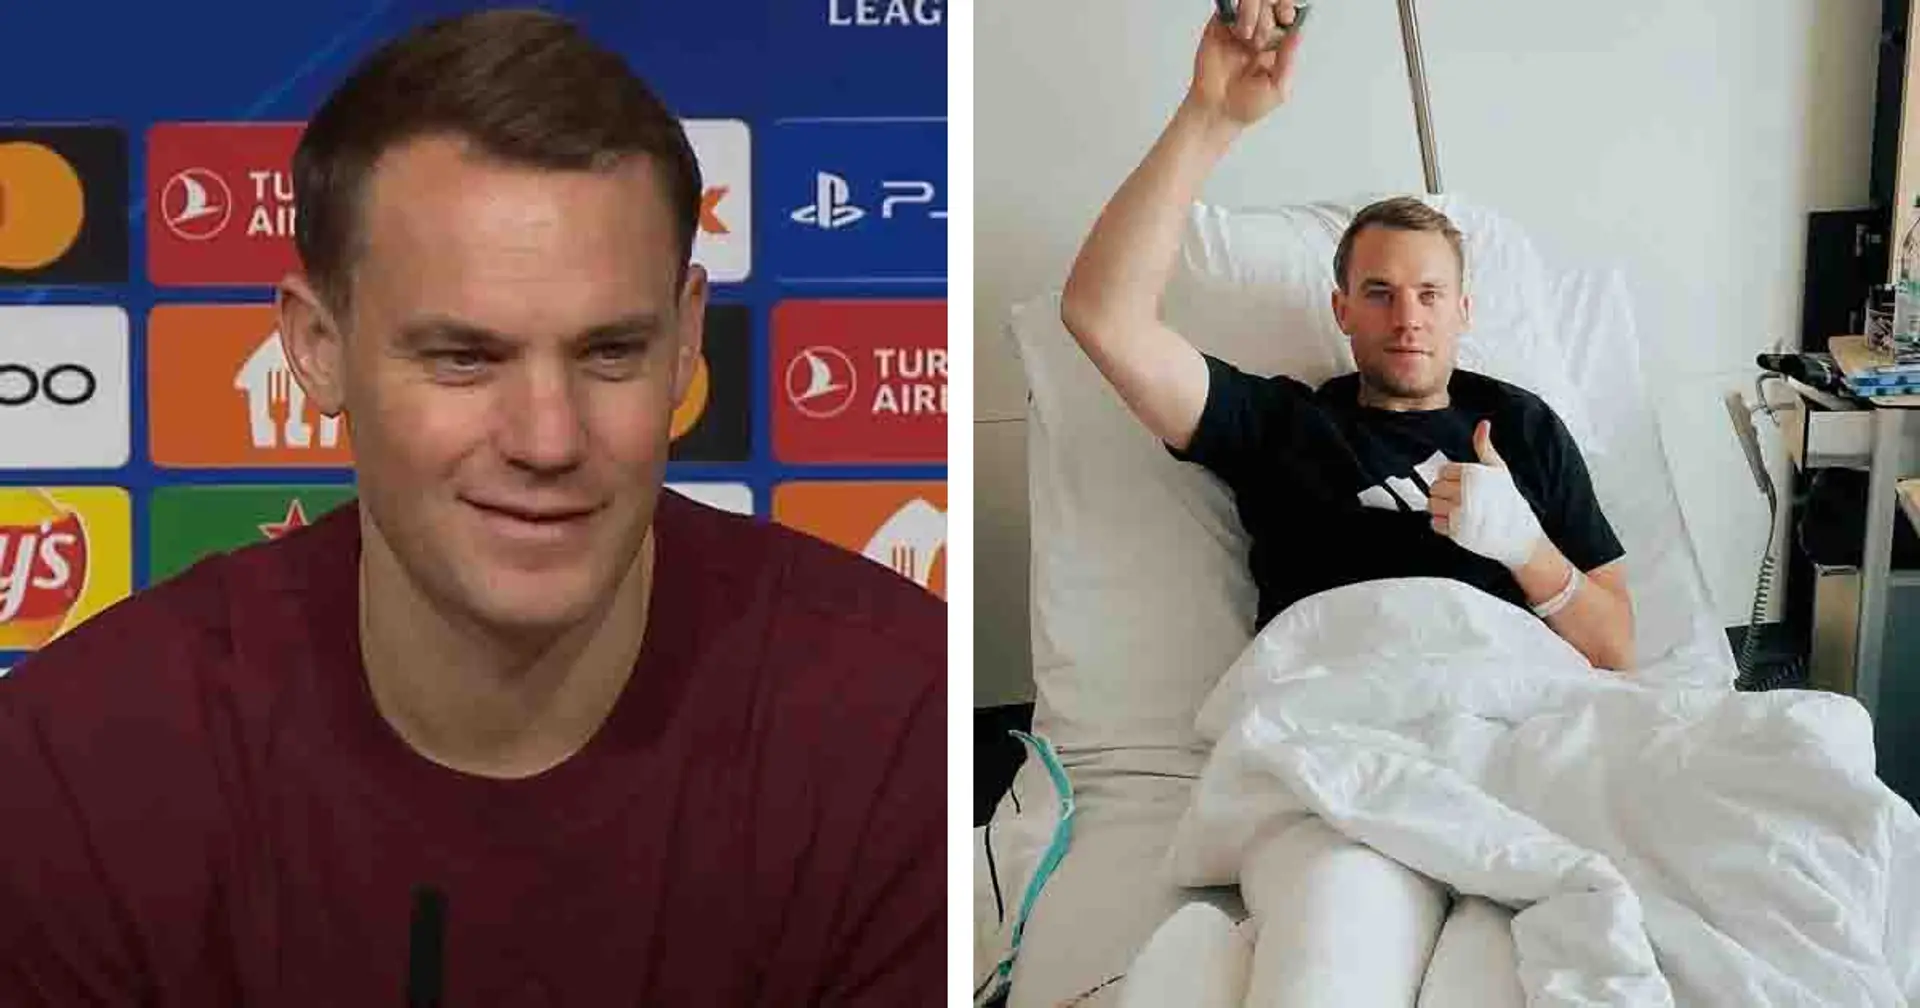 Manuel Neuer: Only one or two out of 10 people would recover from my skiing accident